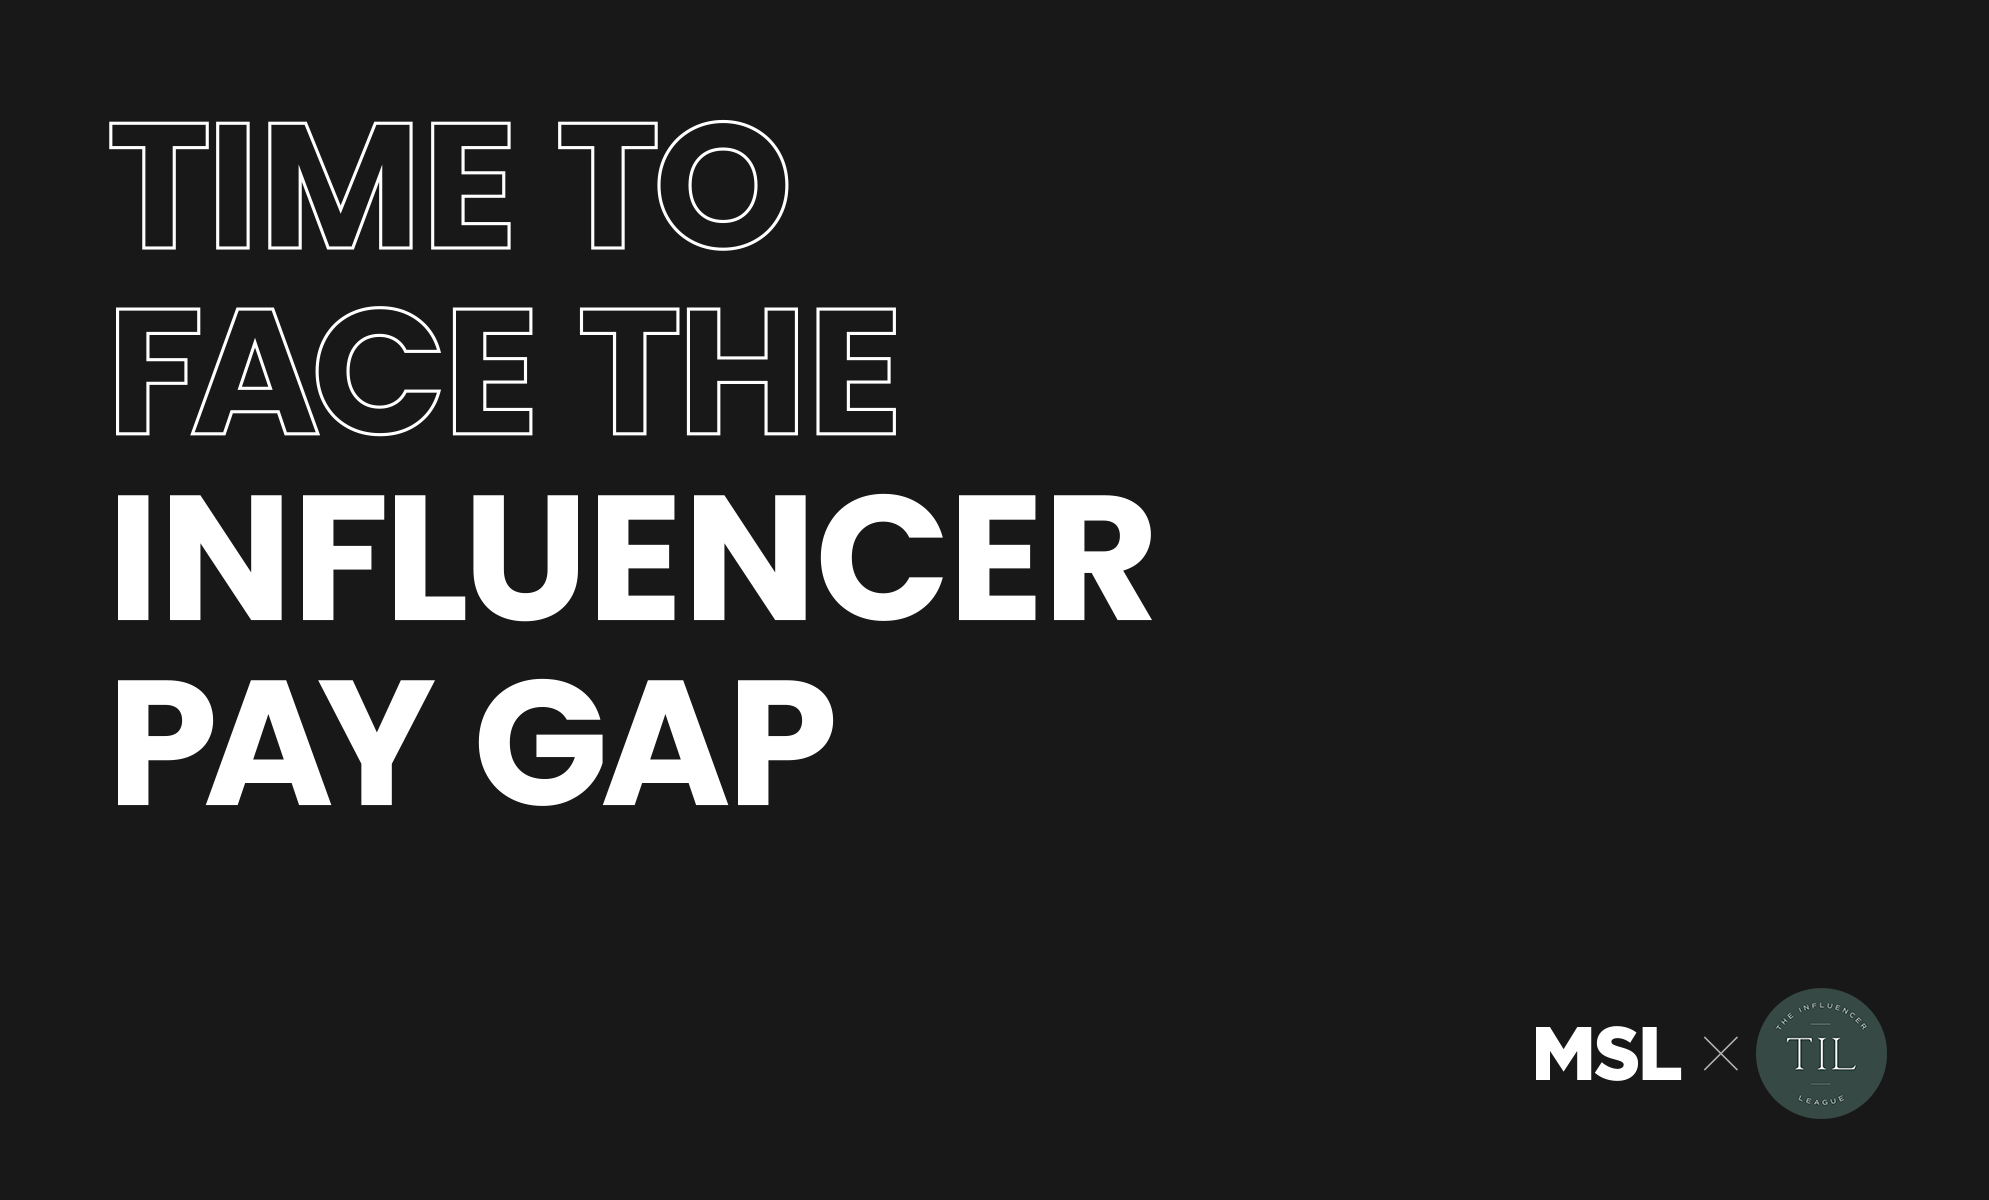 Time to face the influencer pay gap. logos in bottom right - MSL & The Influencer League